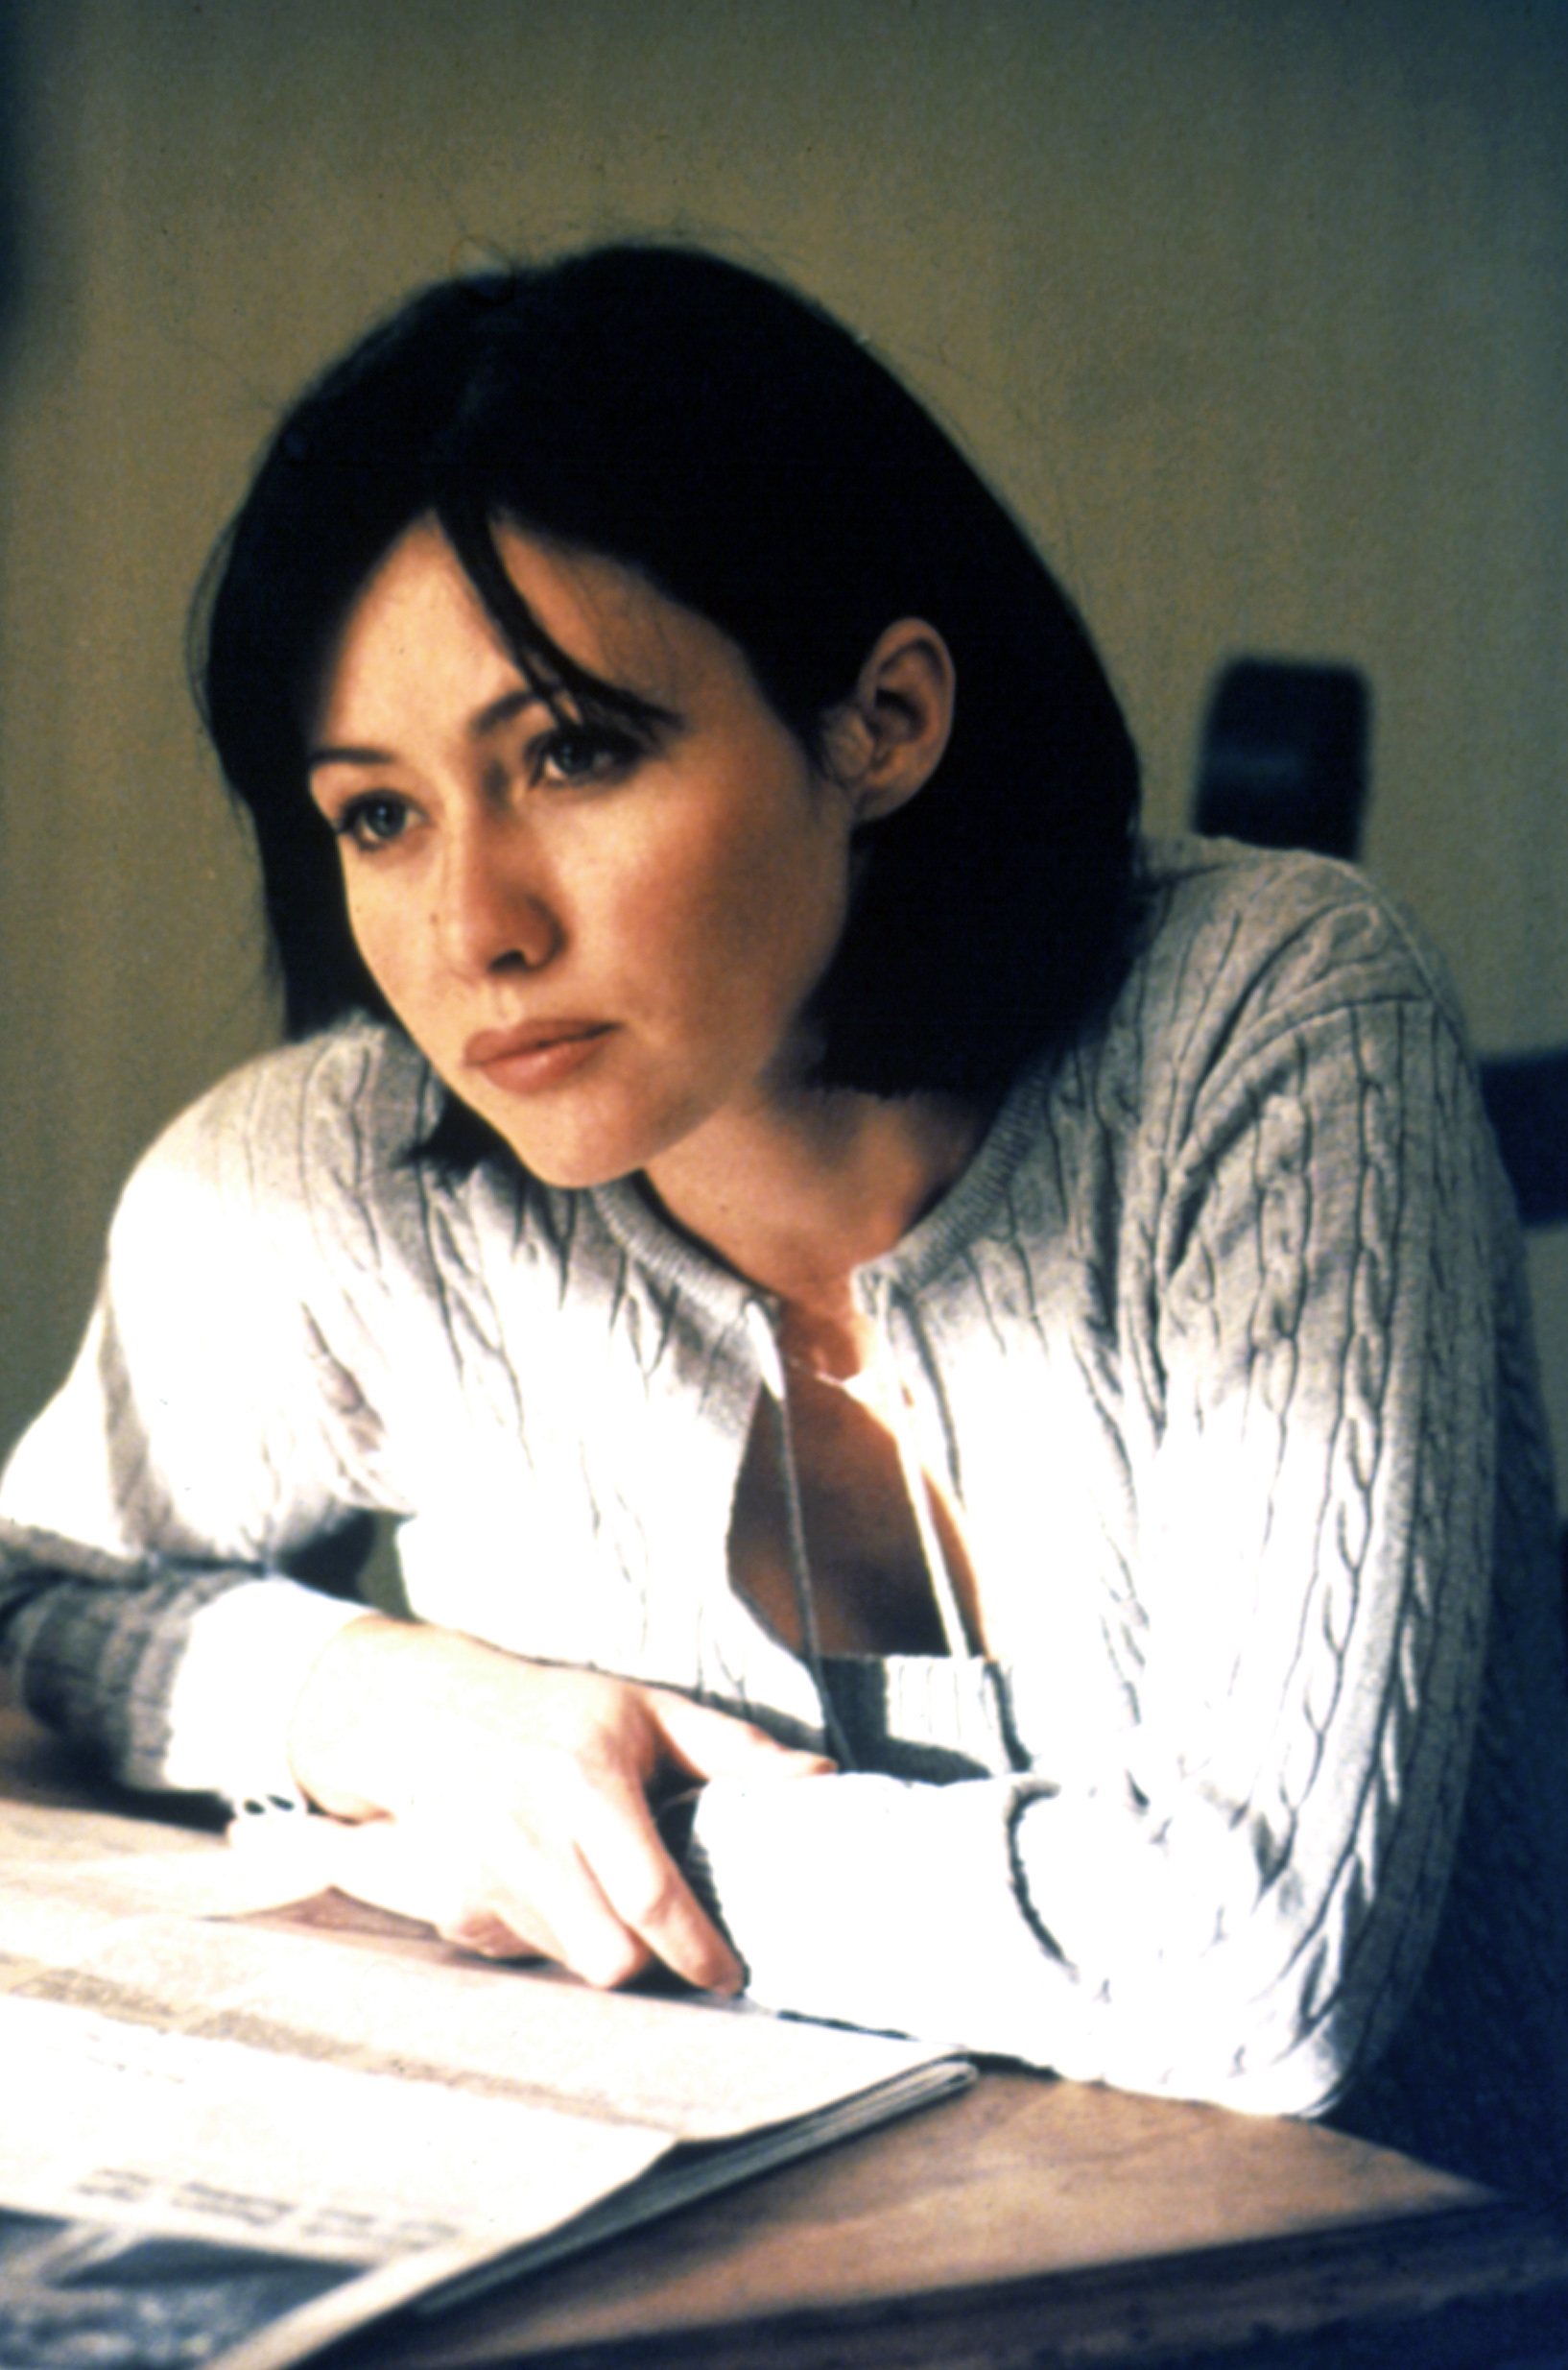 A woman with shoulder-length hair is leaning on a table, wearing a cable-knit cardigan, and looking thoughtful; her gaze is directed off-camera